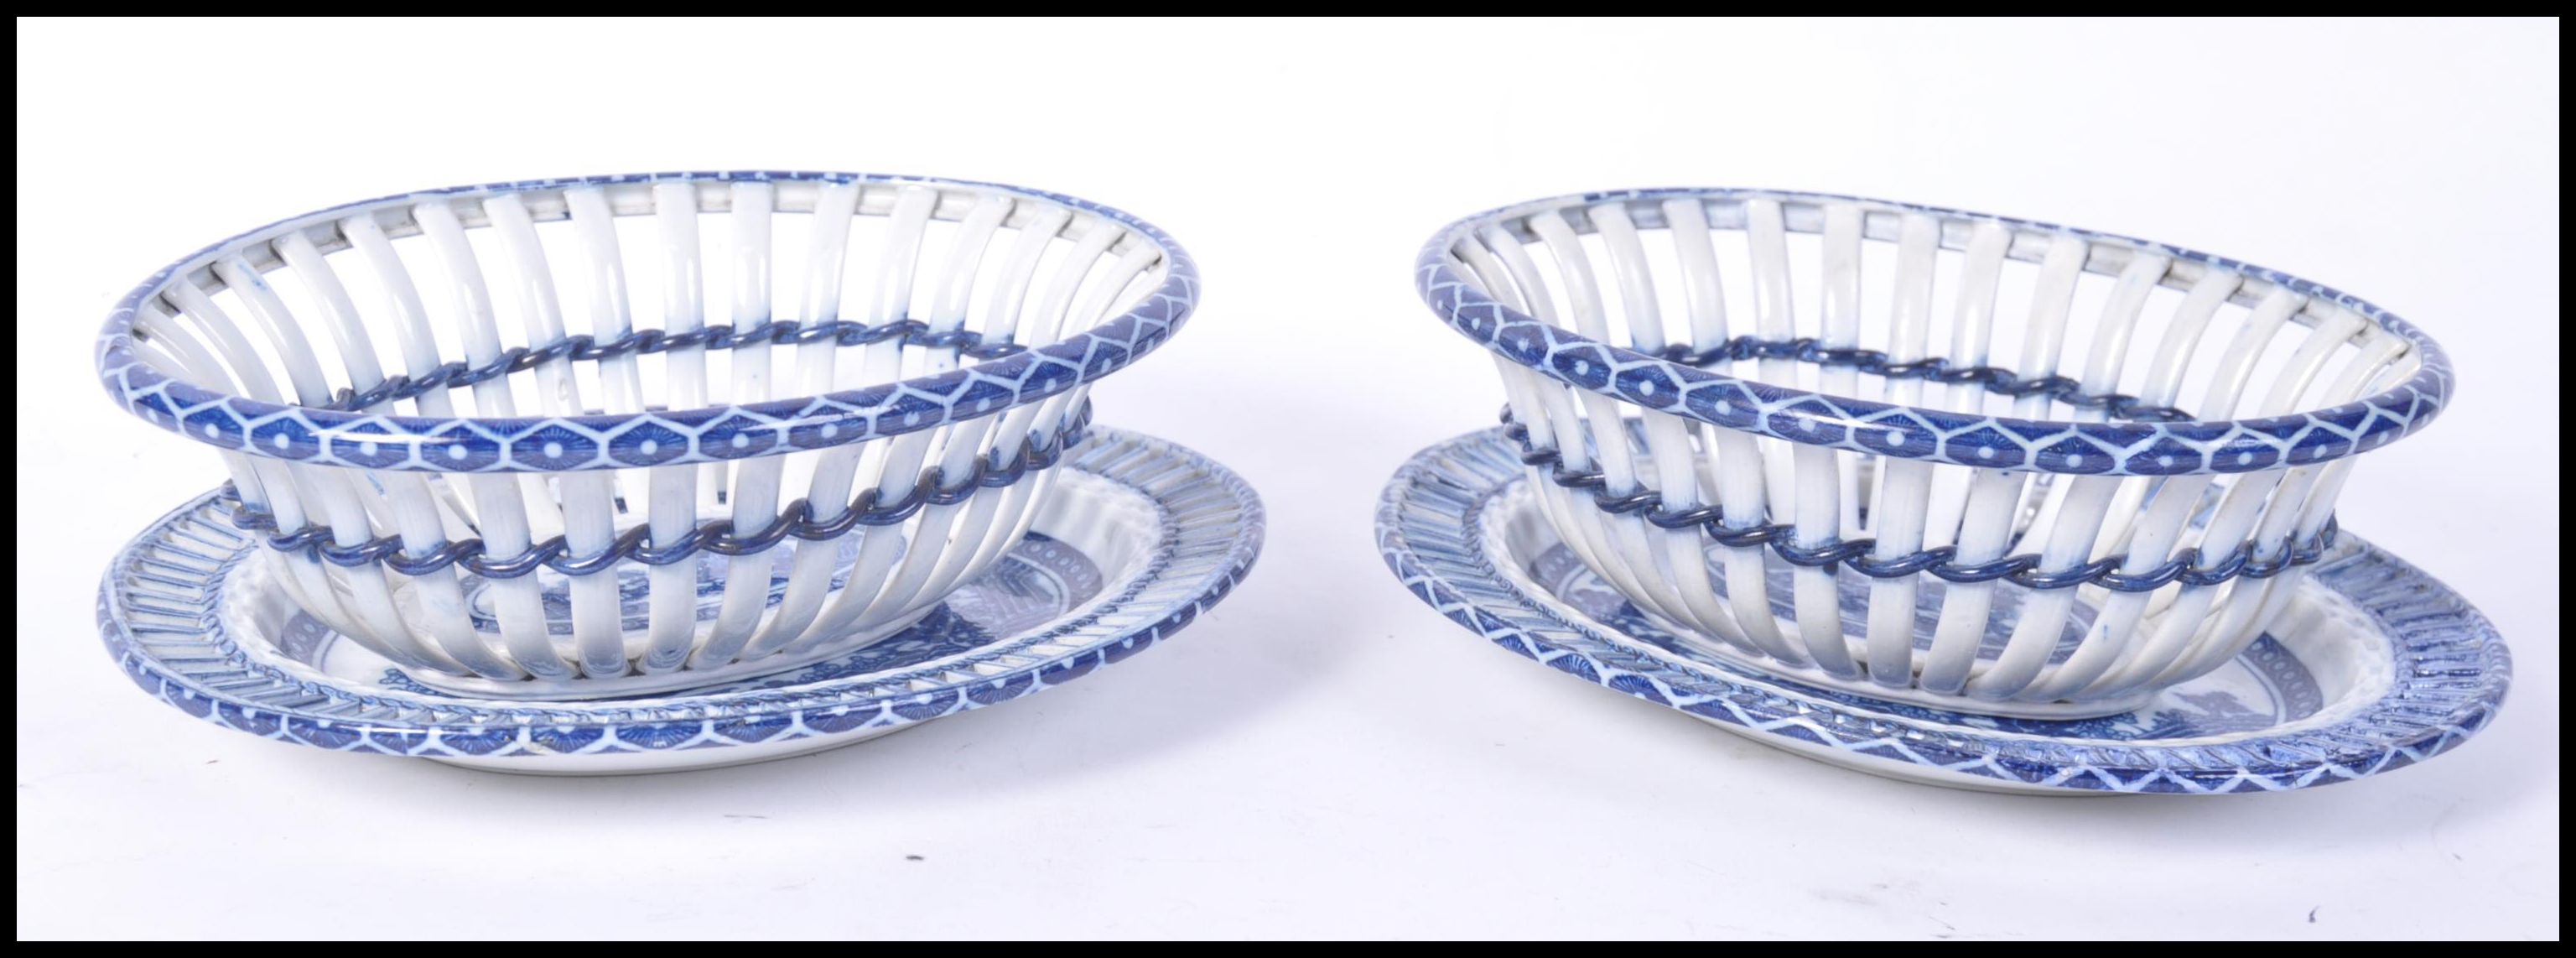 18TH CENTURY CAUGHLEY PORCELAIN BLUE & WHITE CHESTNUT BASKET AND STANDS - Image 2 of 6